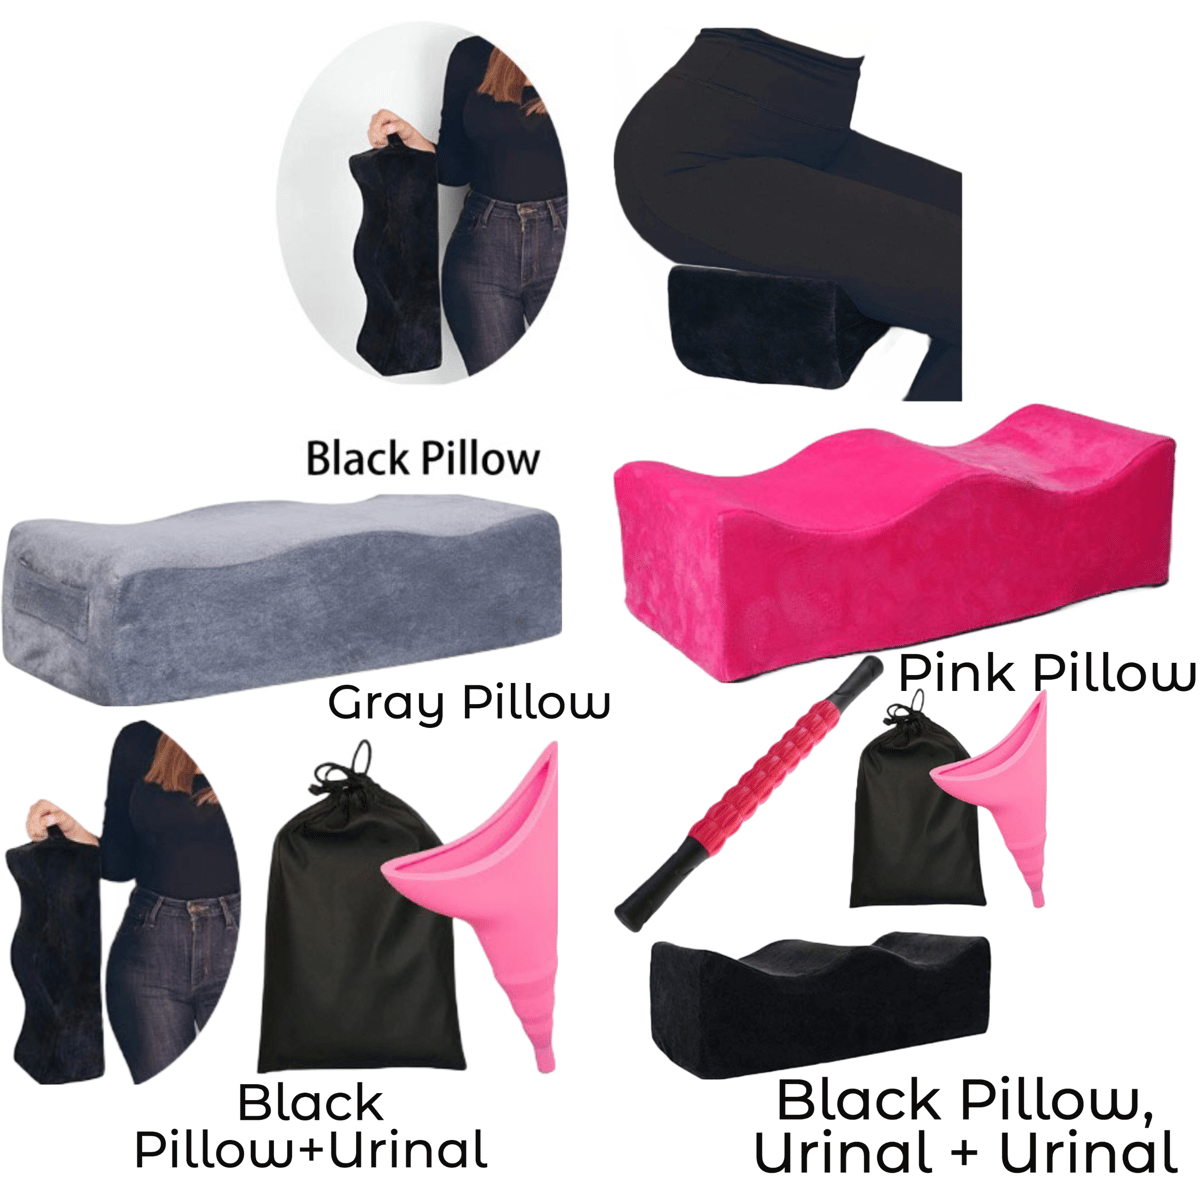 The Original BBL Pillow – My Recovery Box